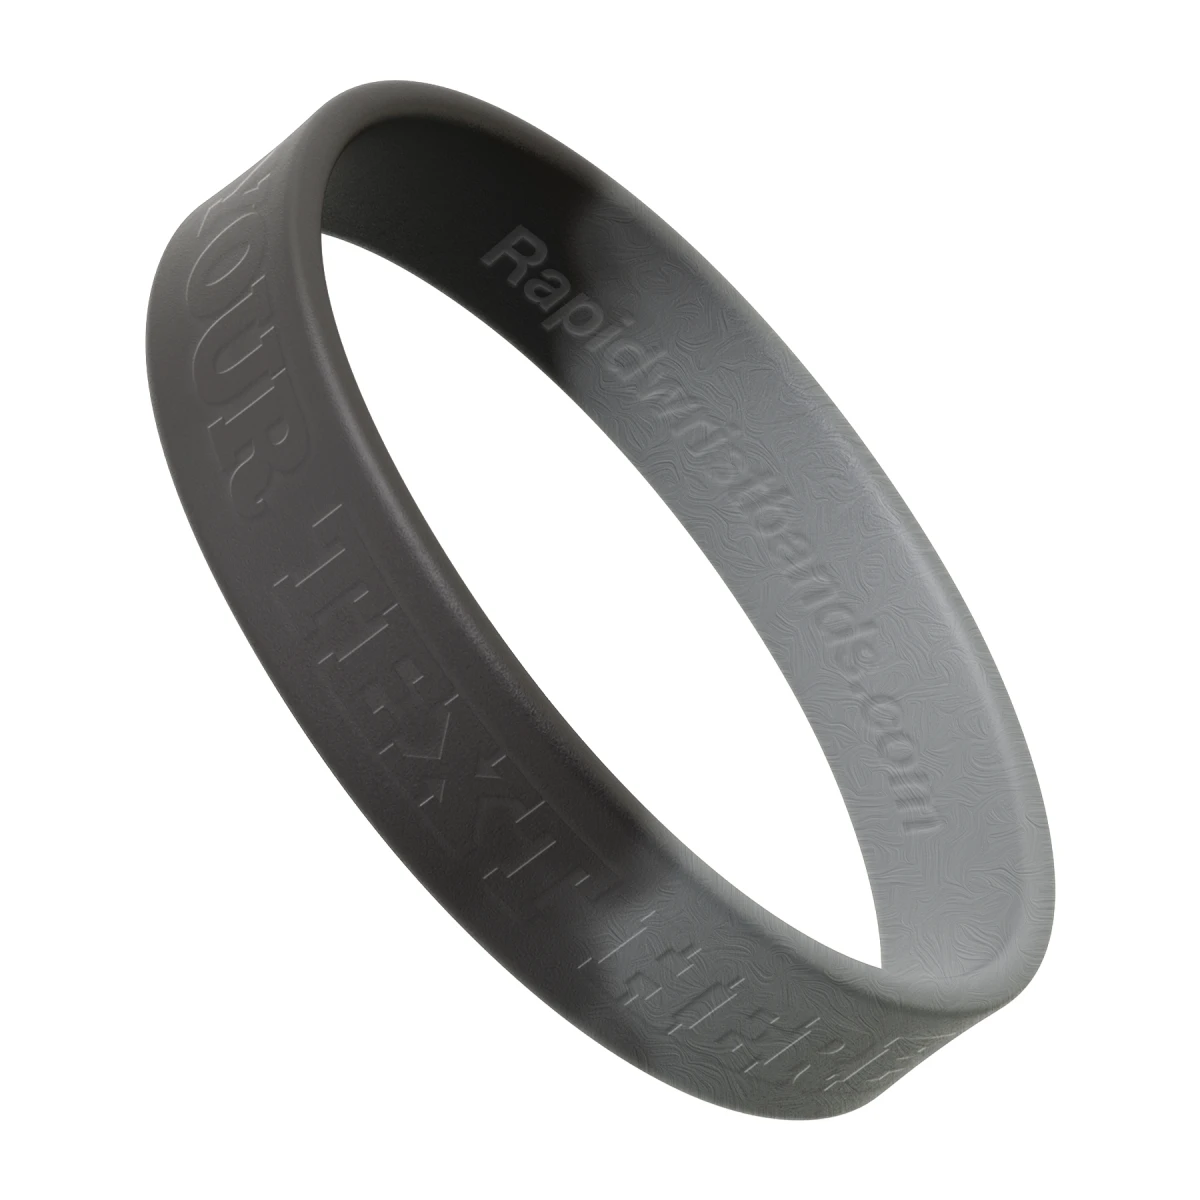 Segmented Black/Silver Wristband With Your Text Here Embossed